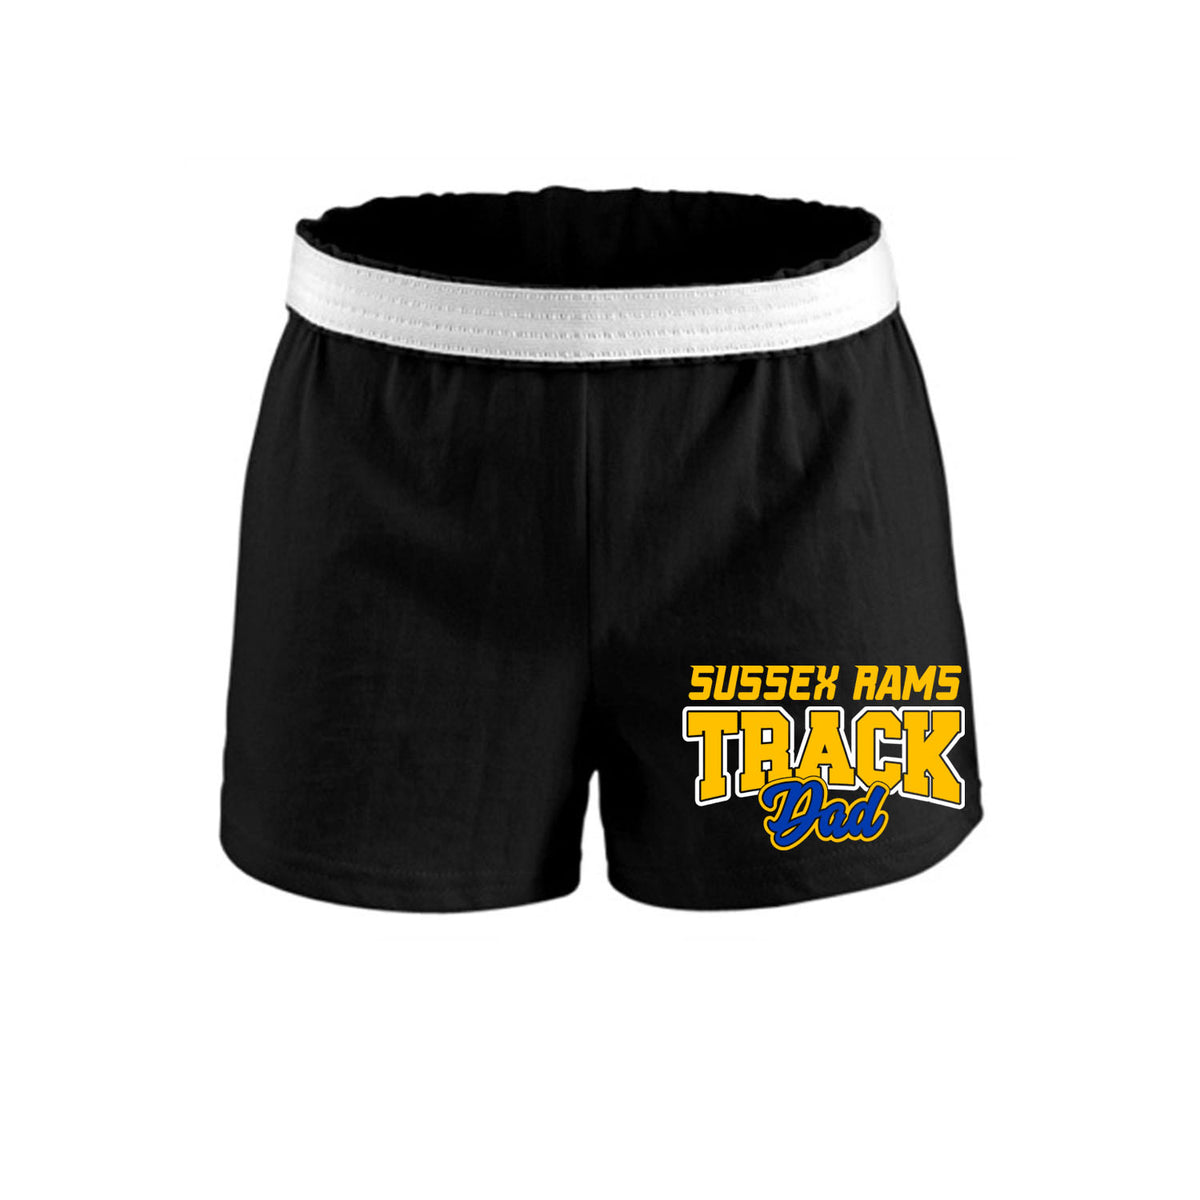 Sussex Rams Track girls Shorts Design 1